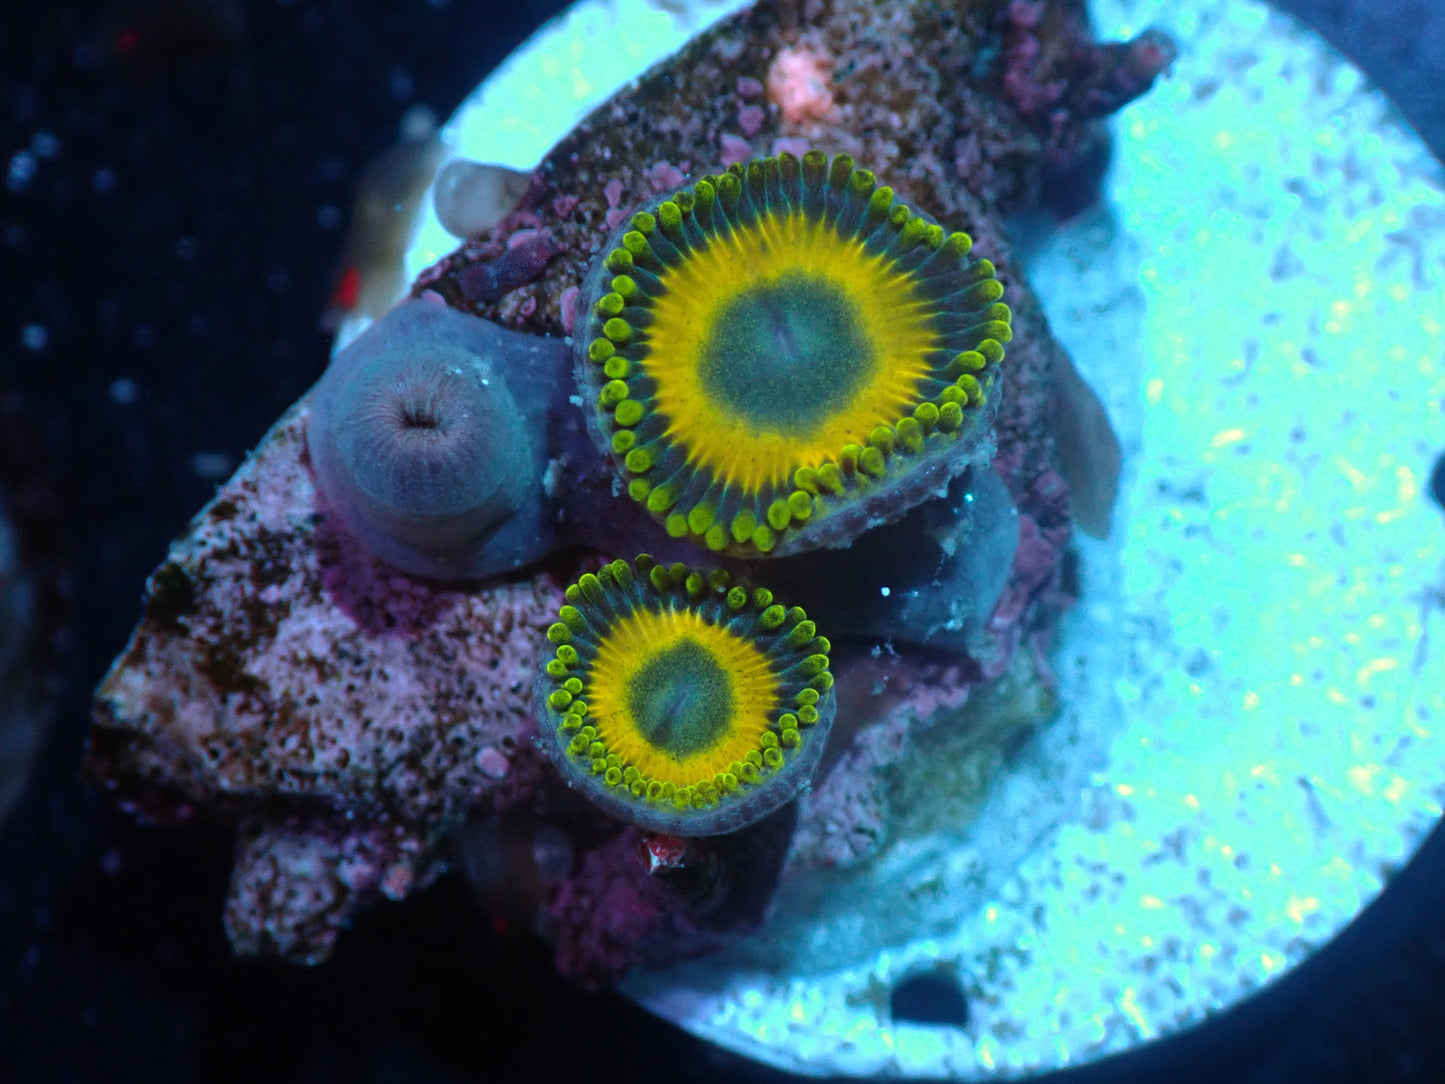 Scrambled Egg Zoas Auctions 5/3 ended